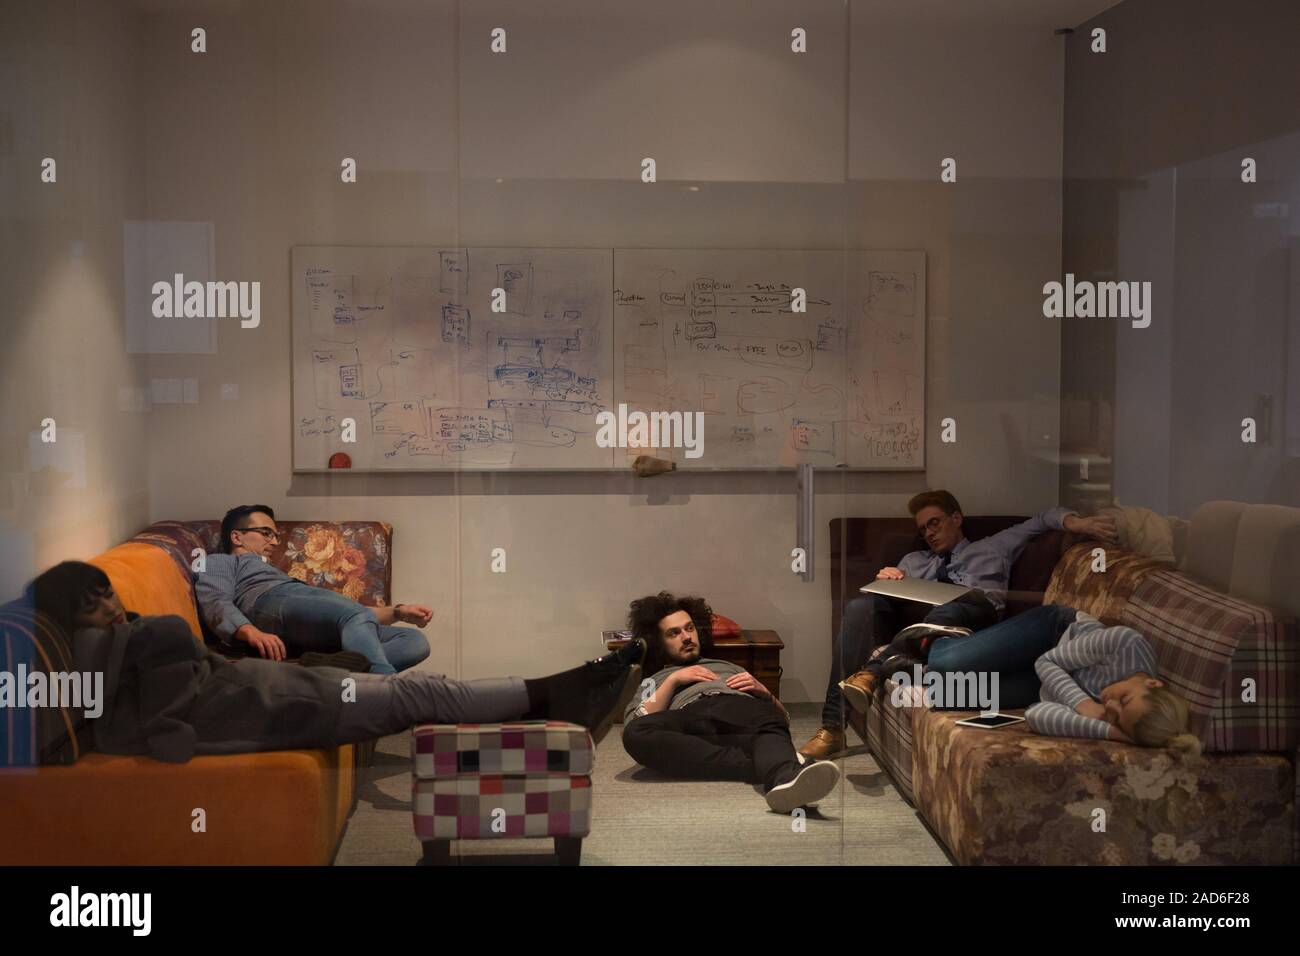 software developers sleeping on sofa in creative startup office Stock Photo